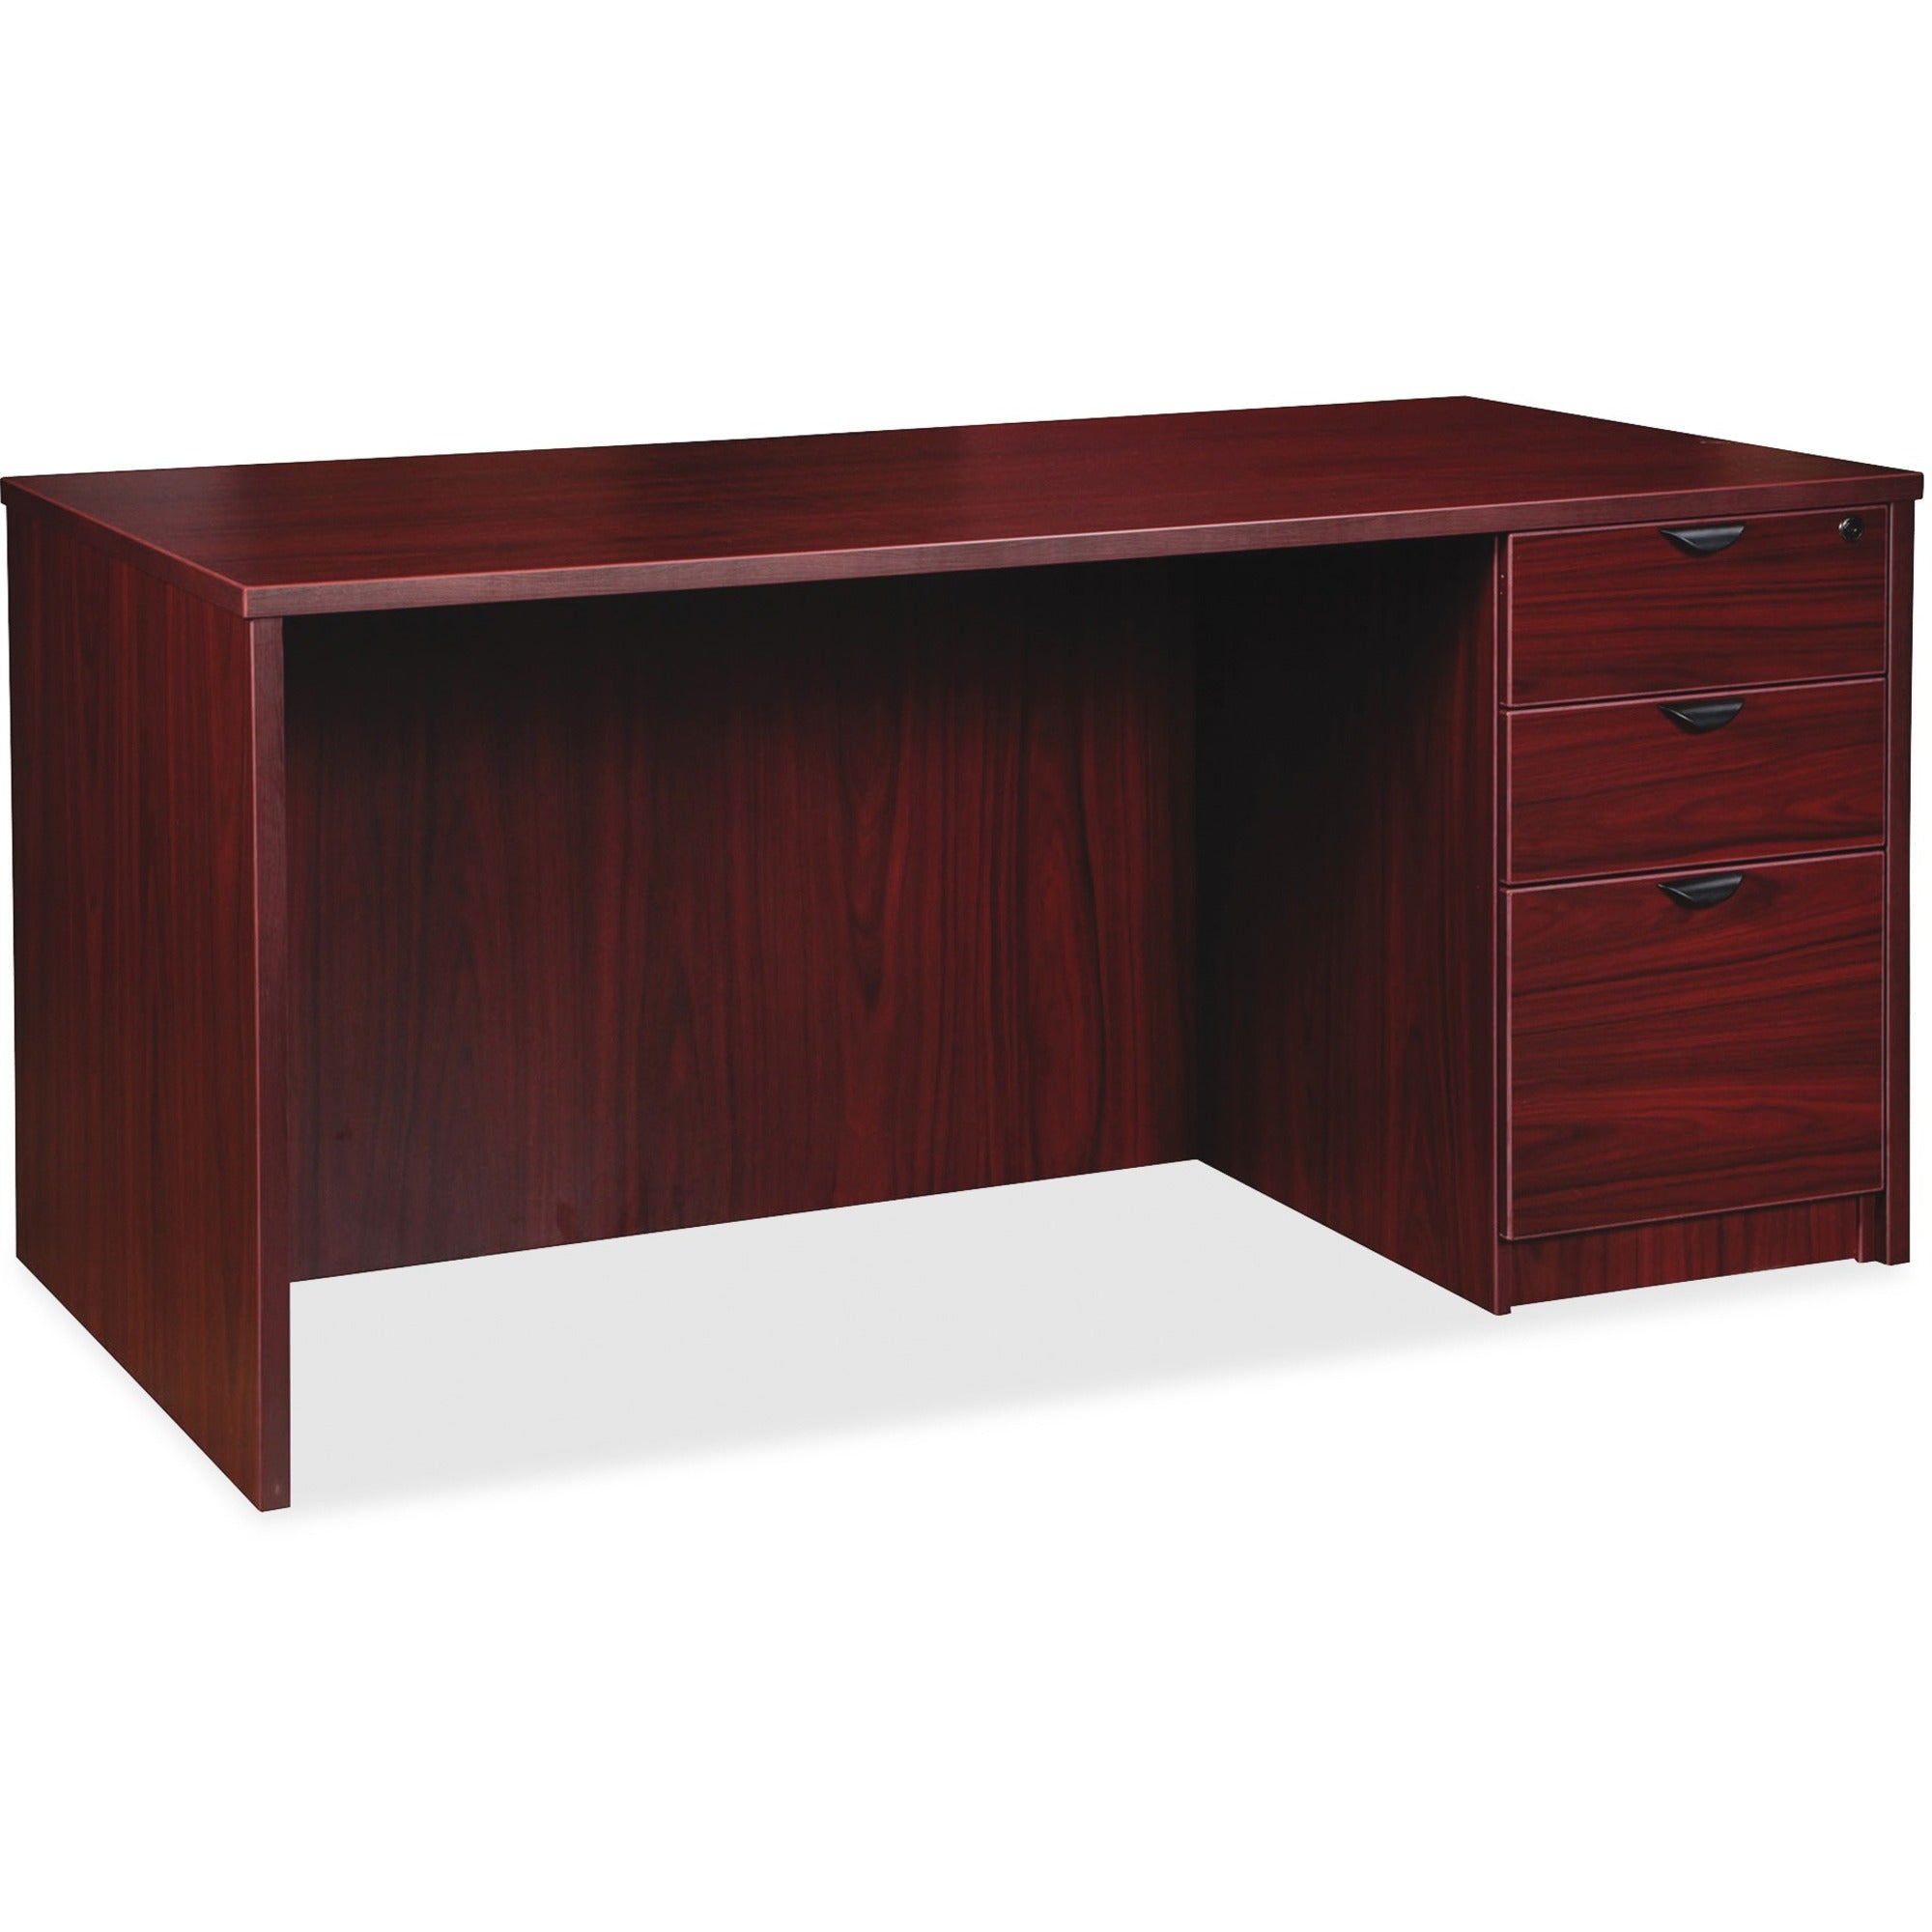 lorell-prominence-20-right-pedestal-desk-1-top-72-x-3629-3-x-file-box-drawers-single-pedestal-on-right-side-band-edge-material-particleboard-finish-mahogany-laminate-thermofused-melamine-tfm_llrpd3672rspmy - 1